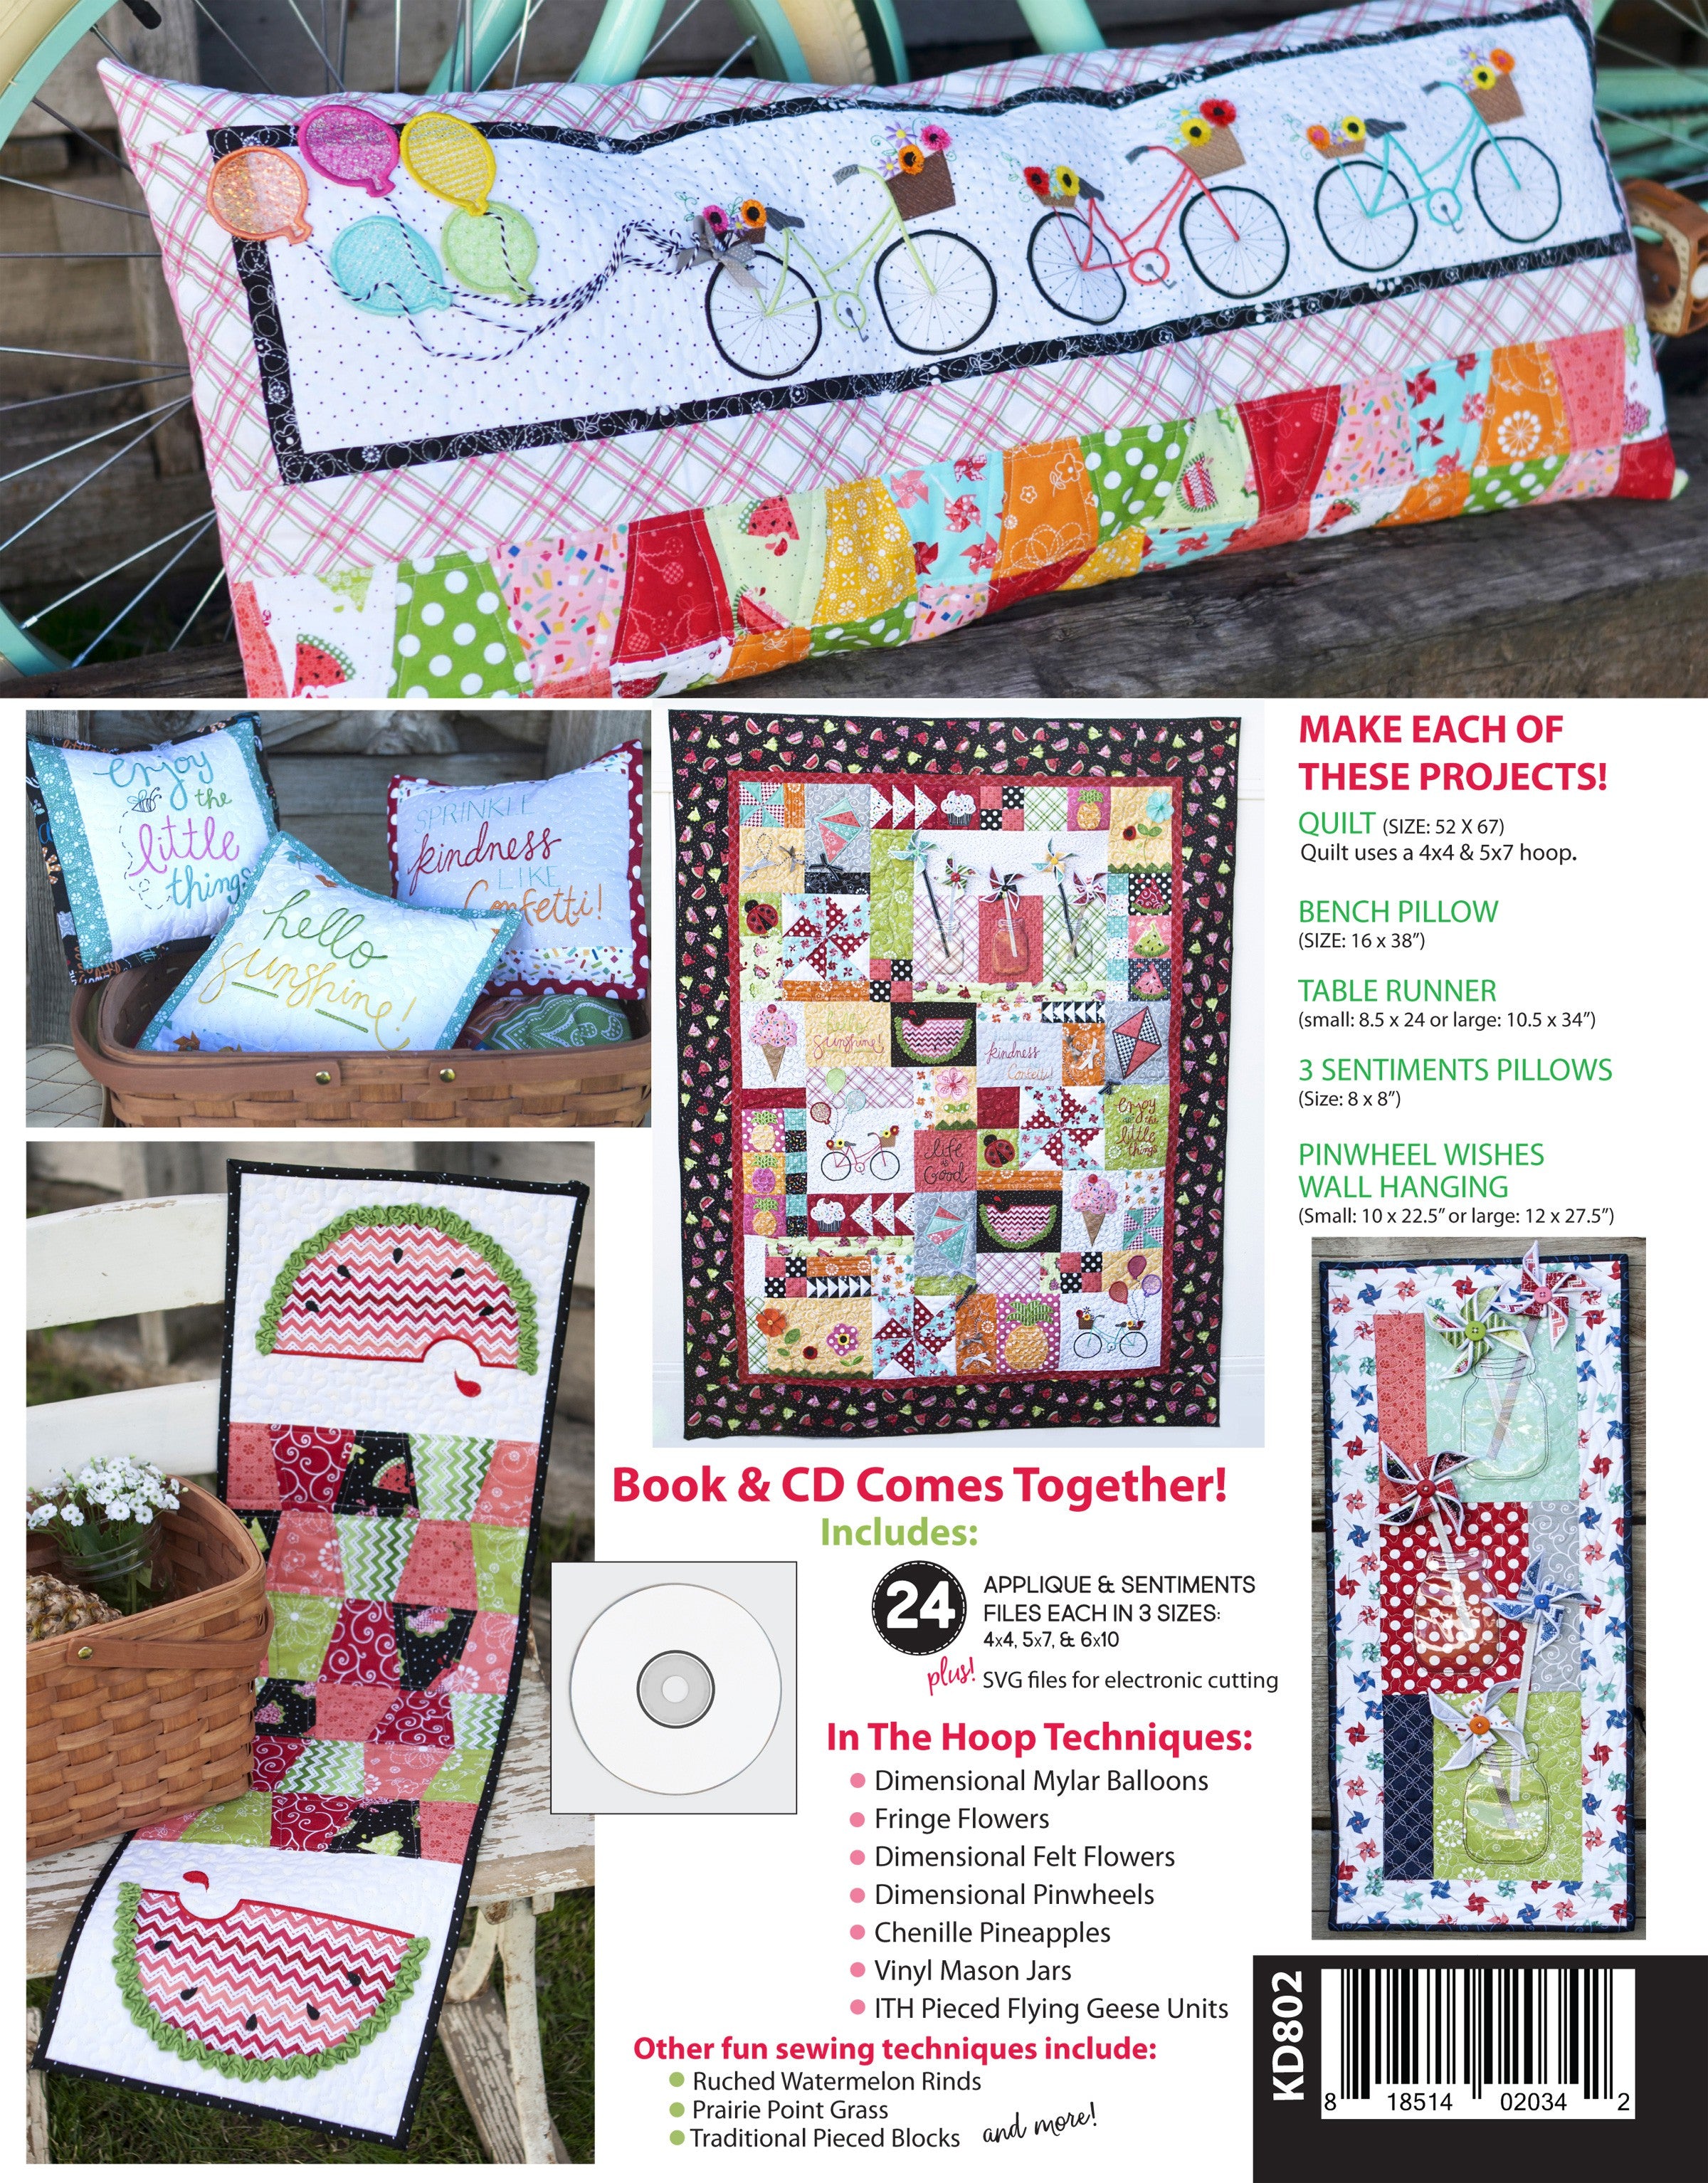 Kimberbell Featured Quilt:Hello Sunshine! The Sewing Version (KD718)